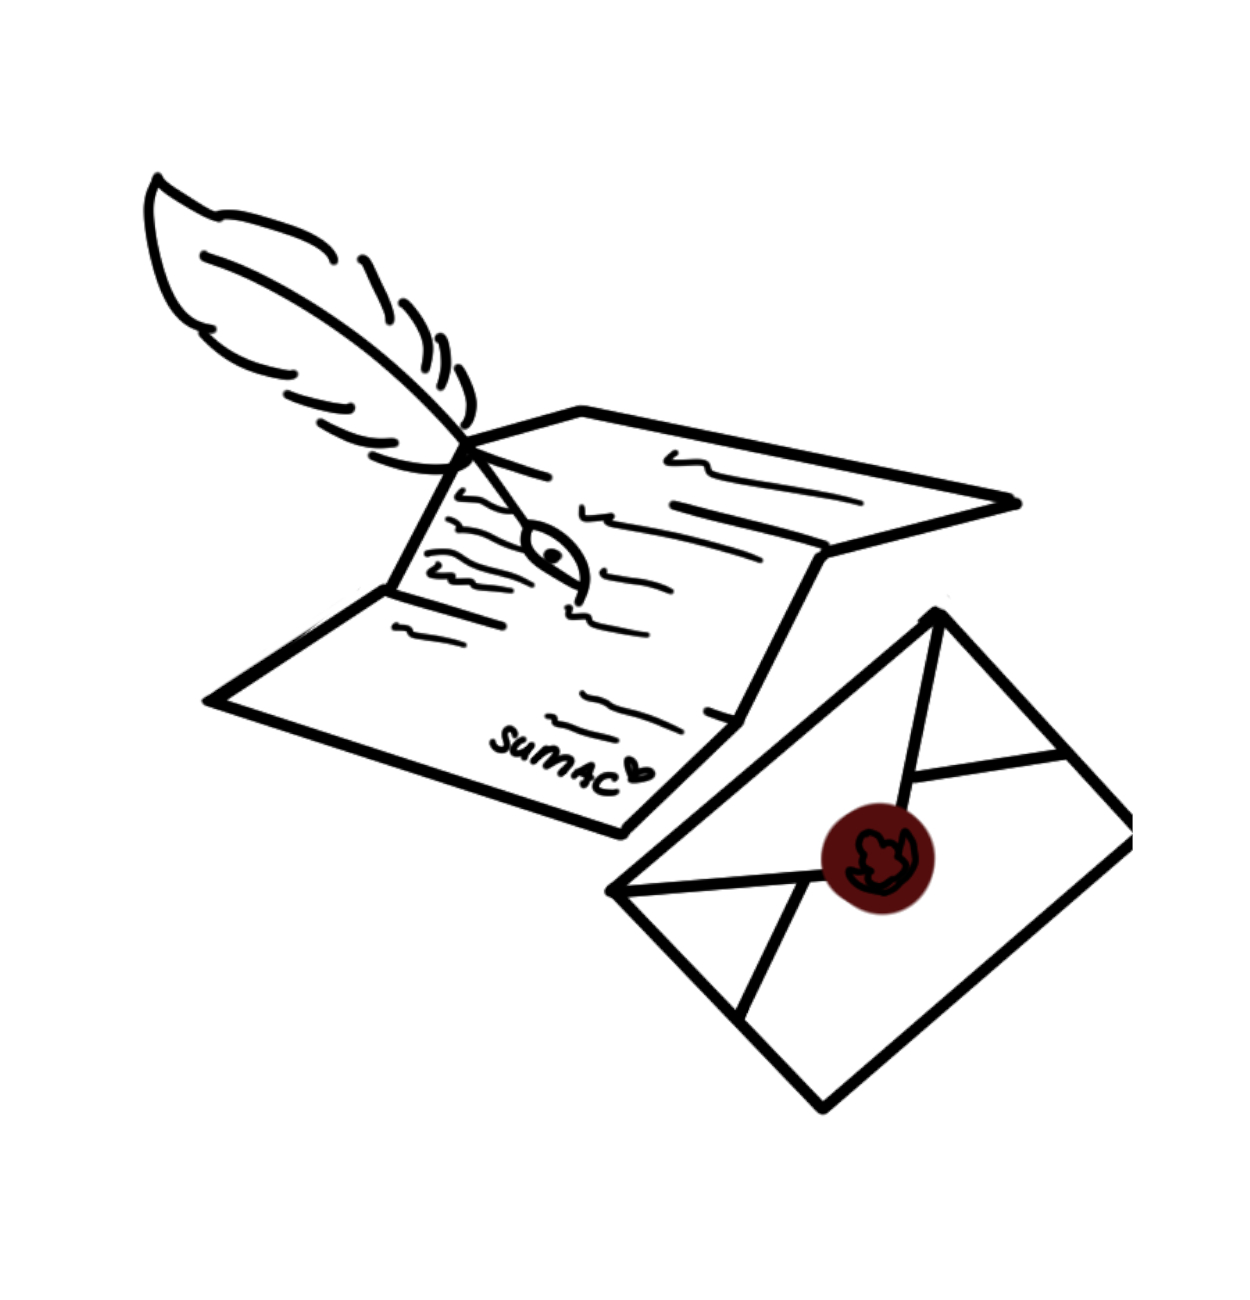 An illustration of a quill writing on a letter signed with Sumac. On the side rests a envelope with a red sumac seal.